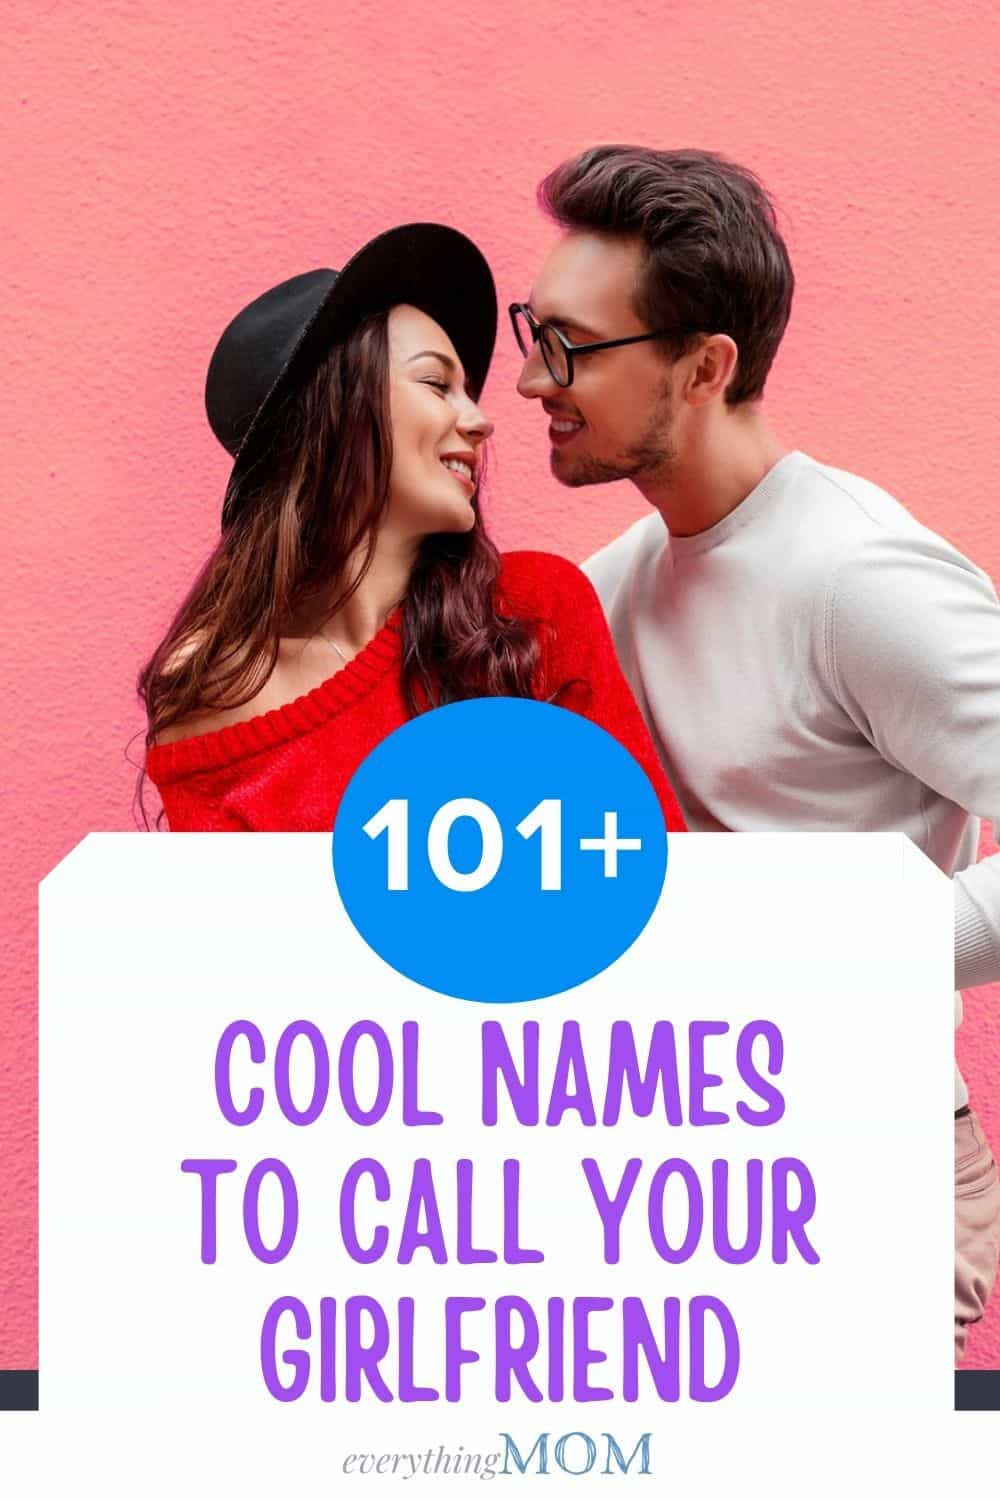 101+ Cool Names to Call Your Girlfriend | EverythingMom